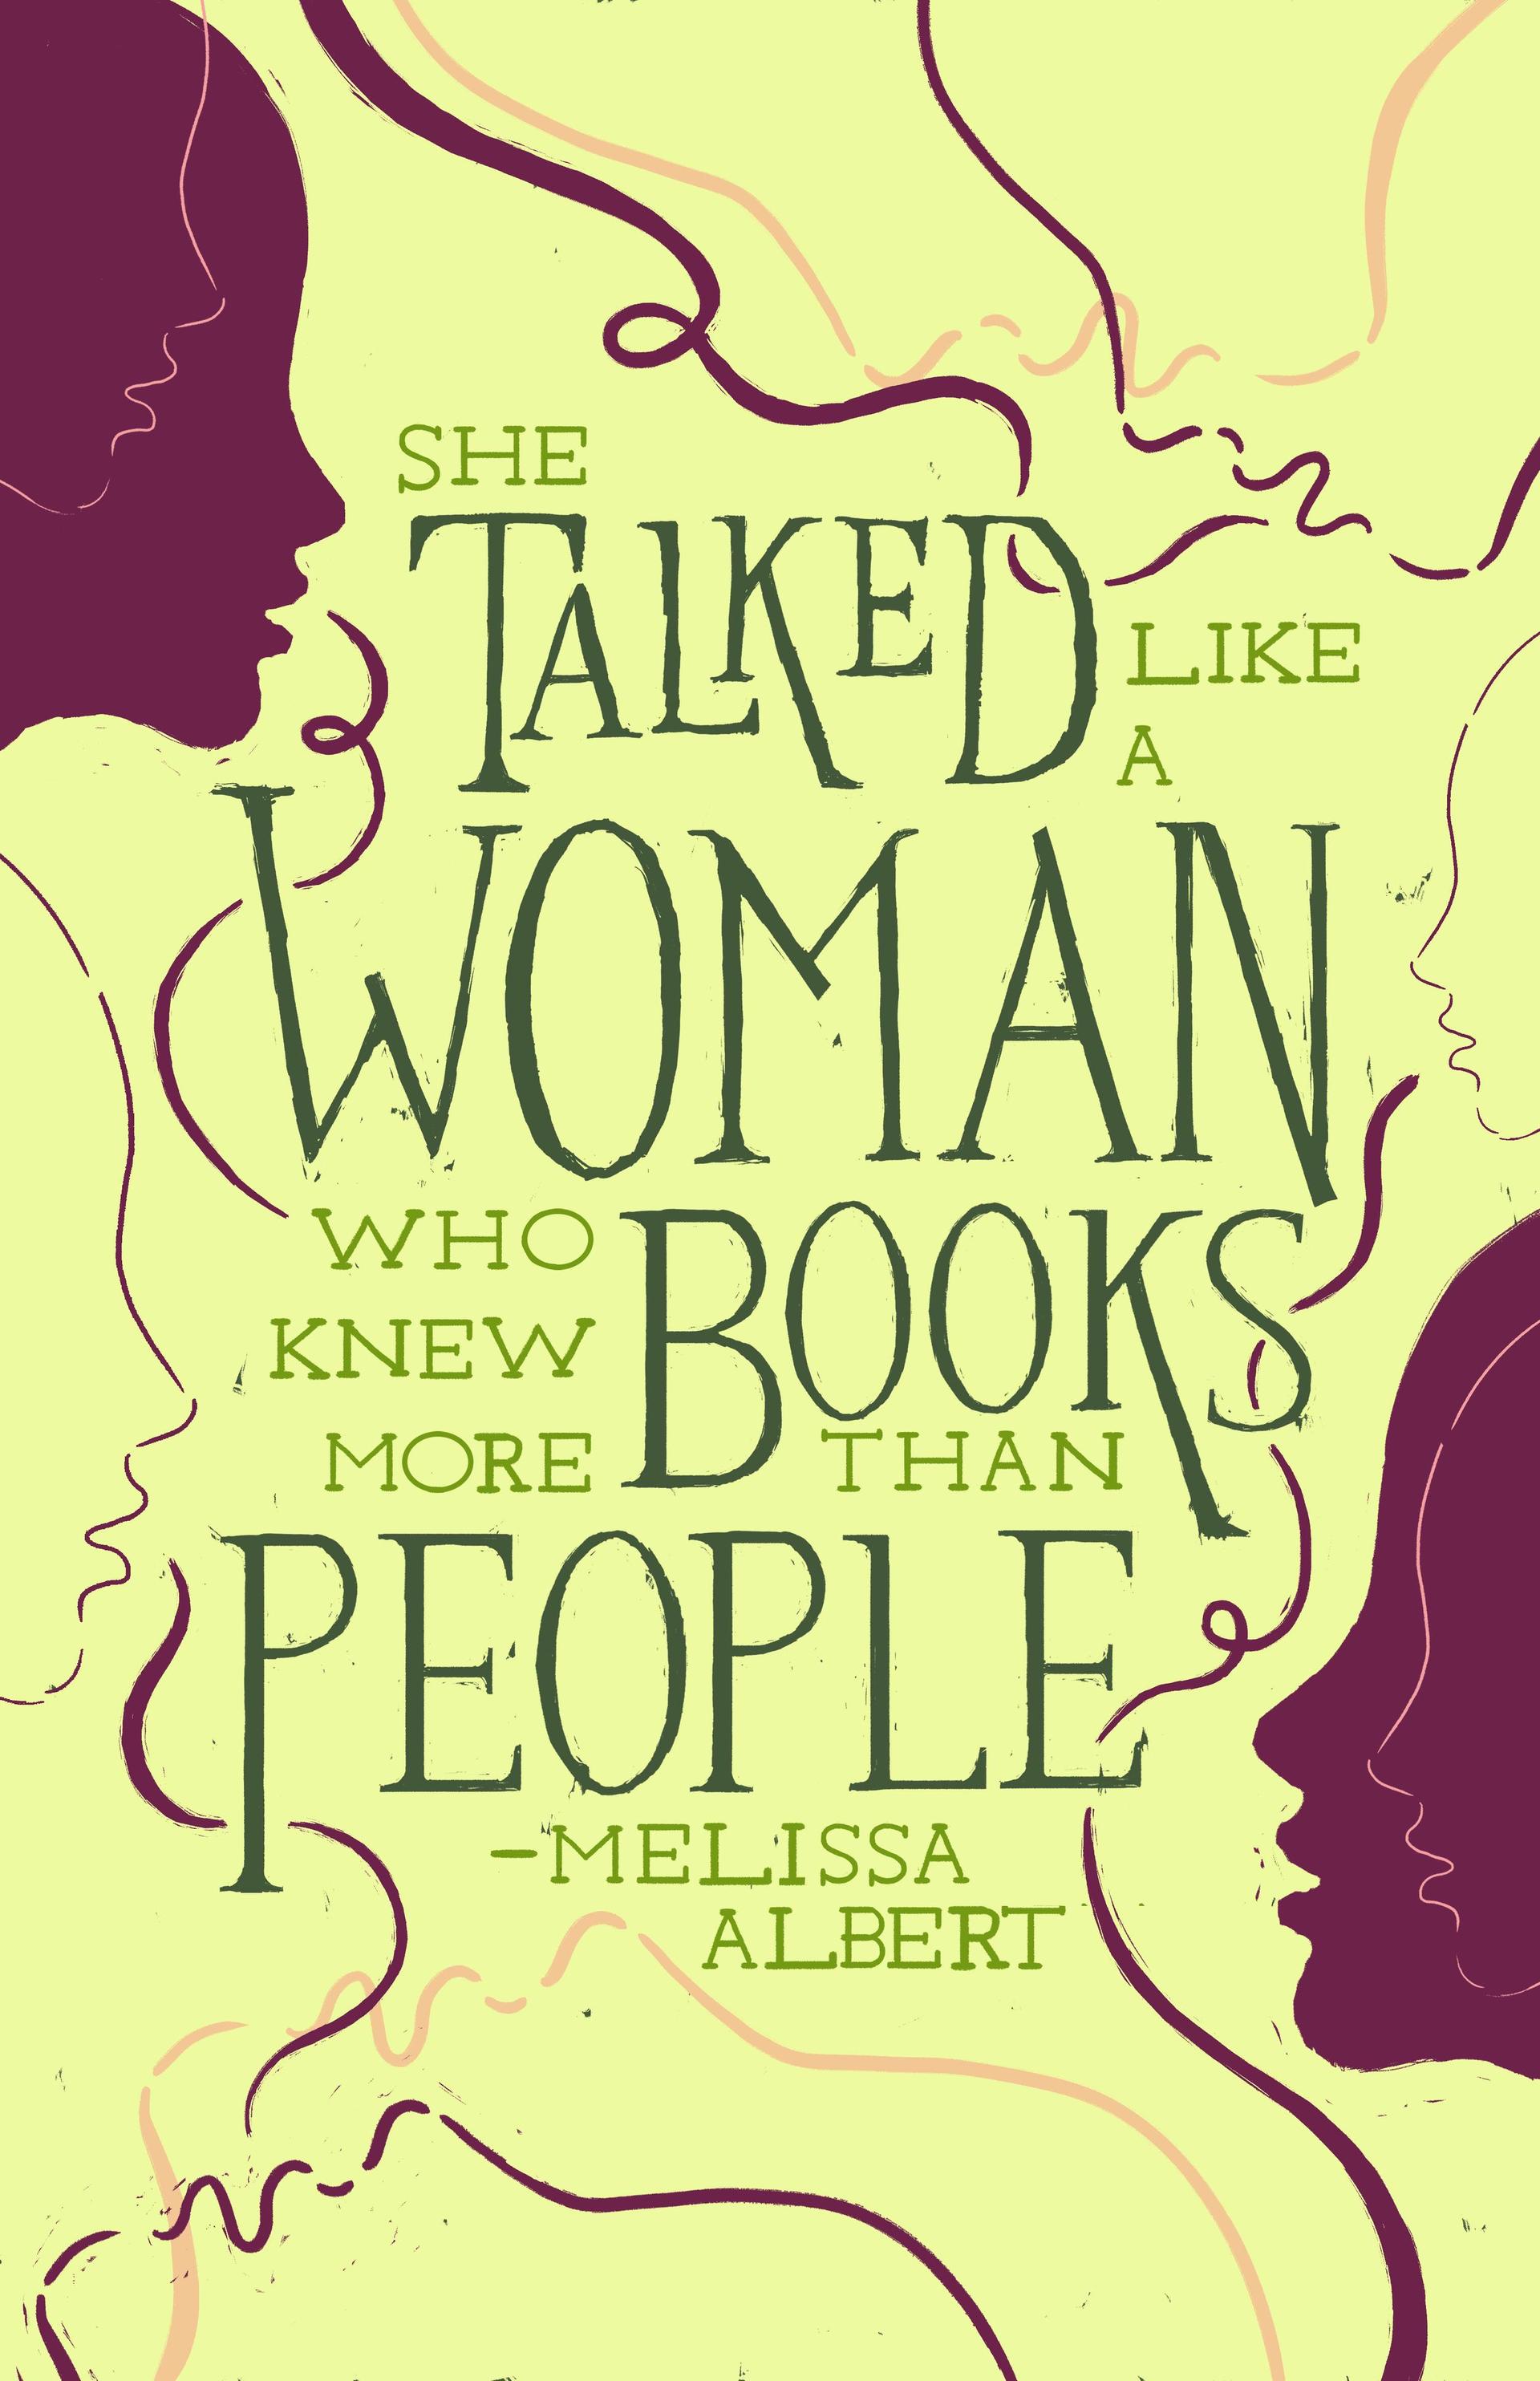 Illutrated typography of the quote 'She talked like a woman who knew more books than people' -Melissa Albert 